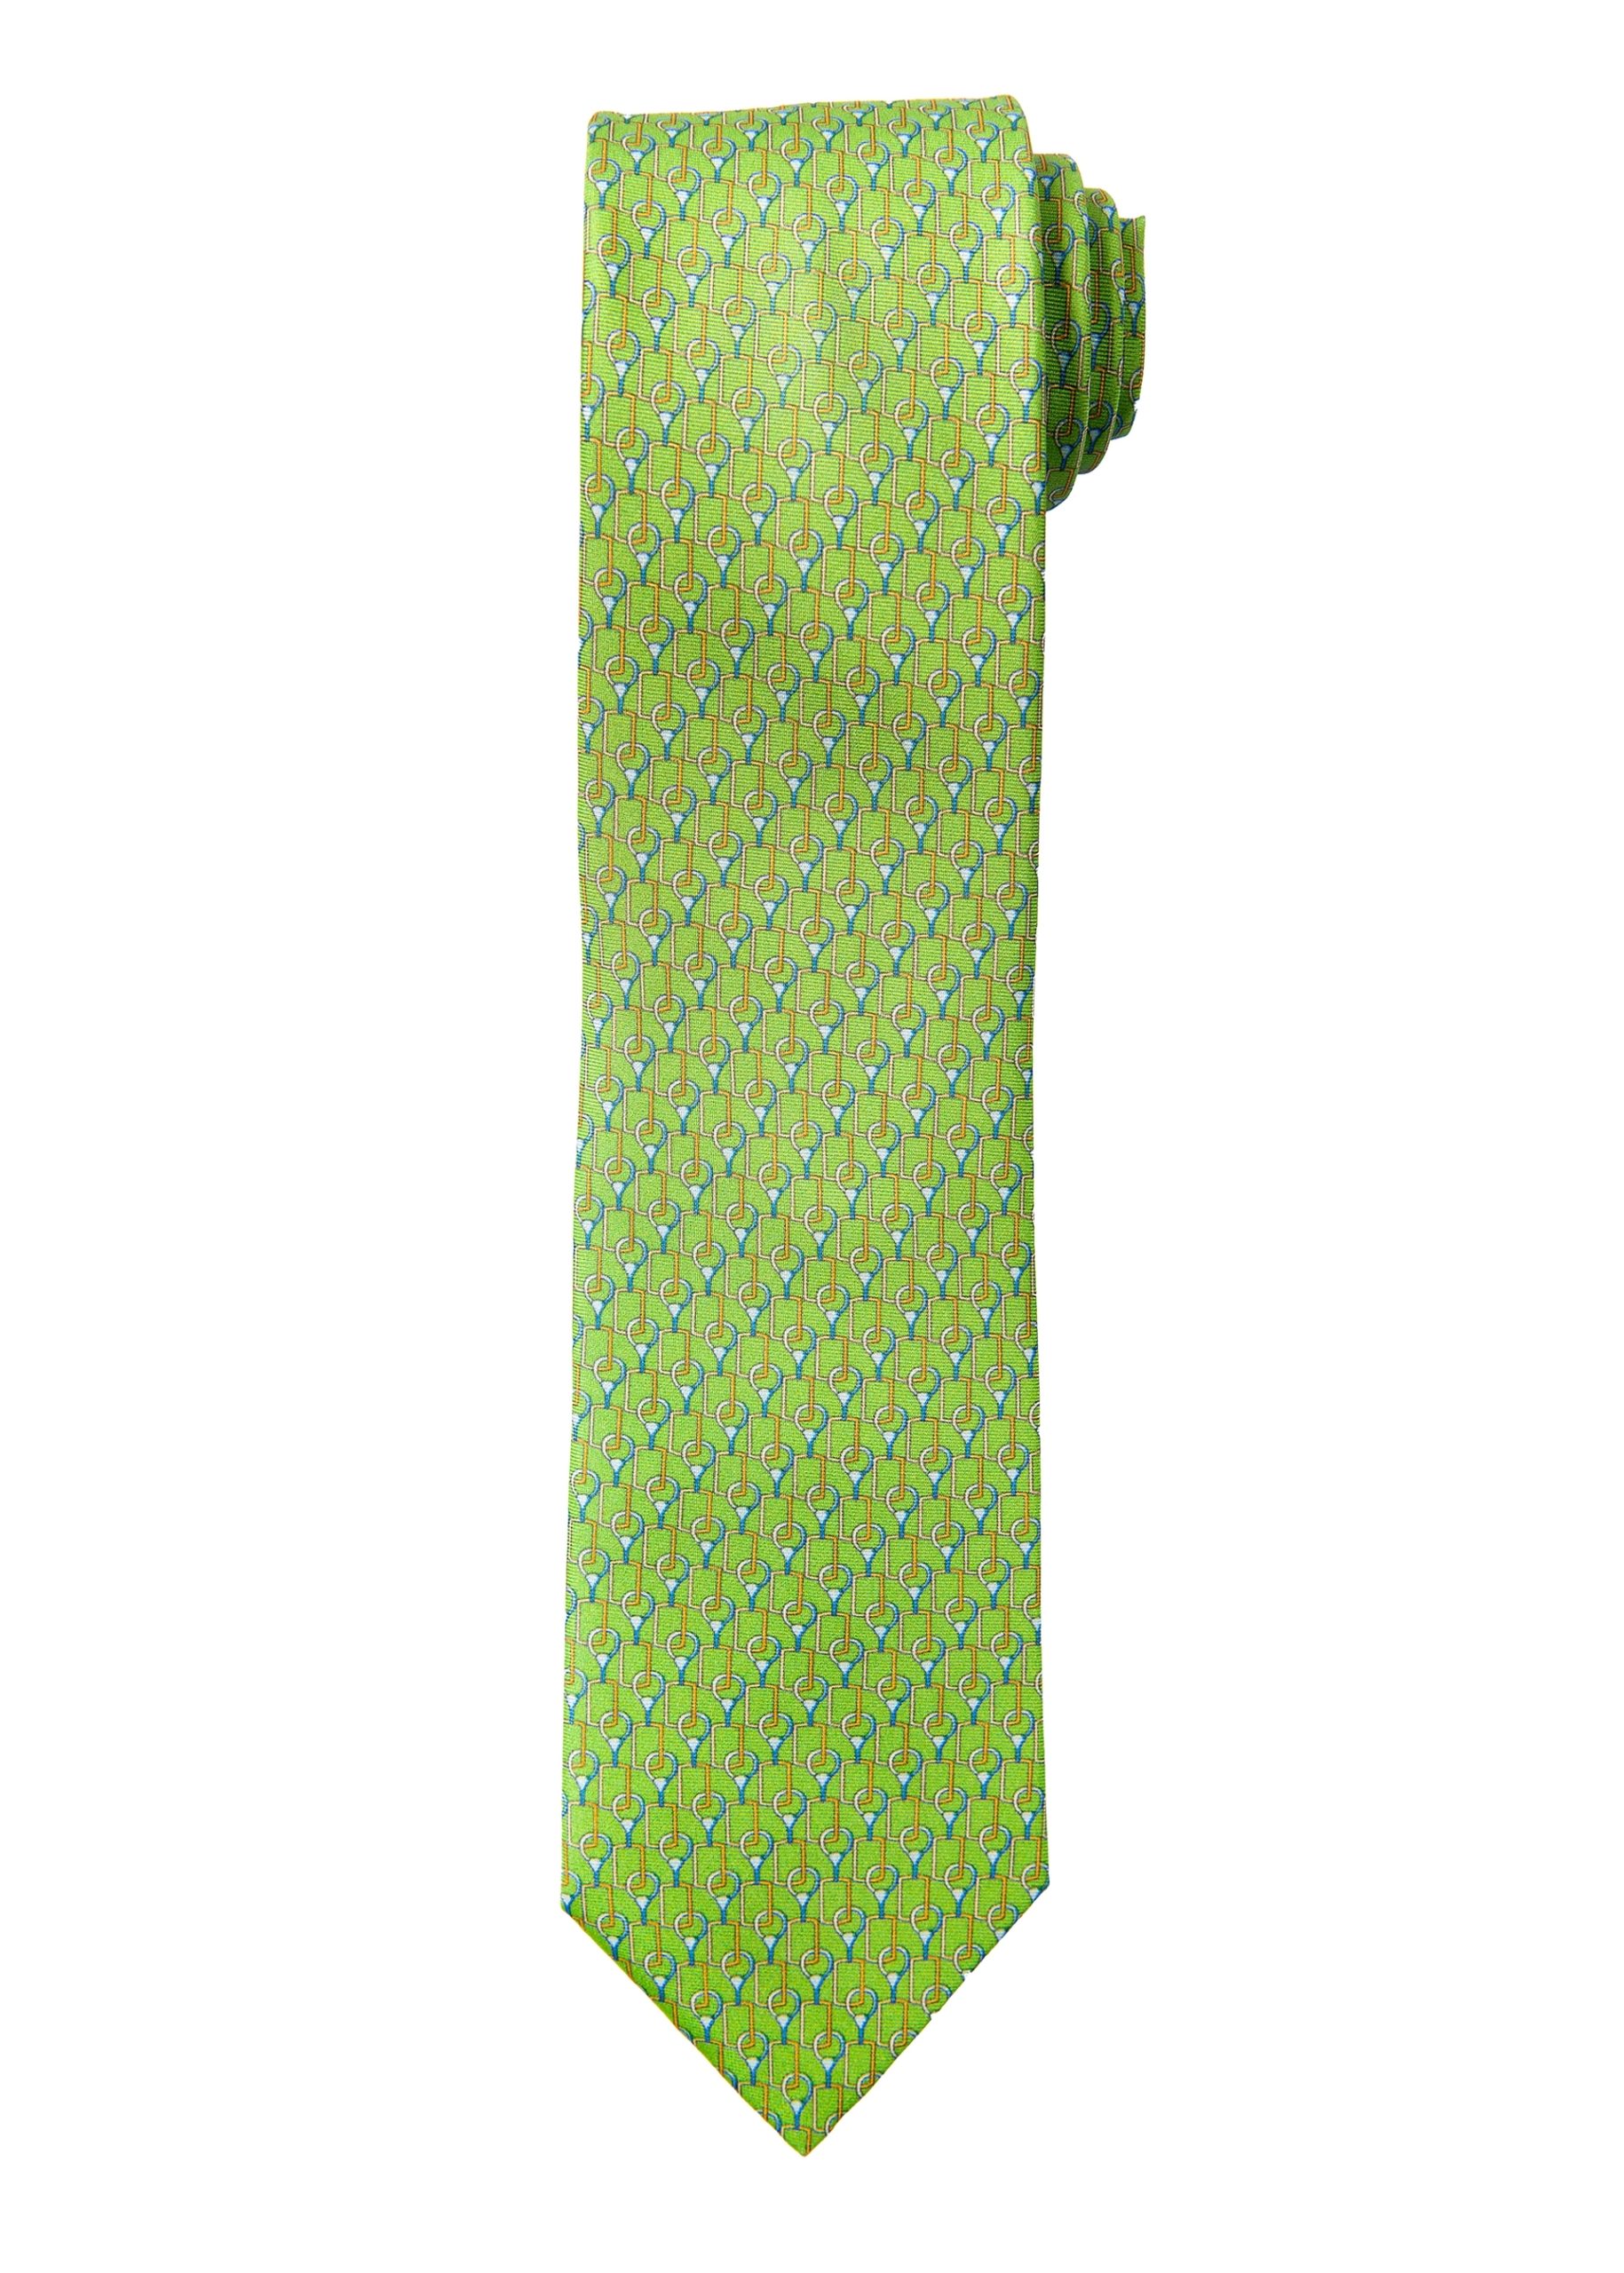 A classic men’s silk tie with rounded link design in green.